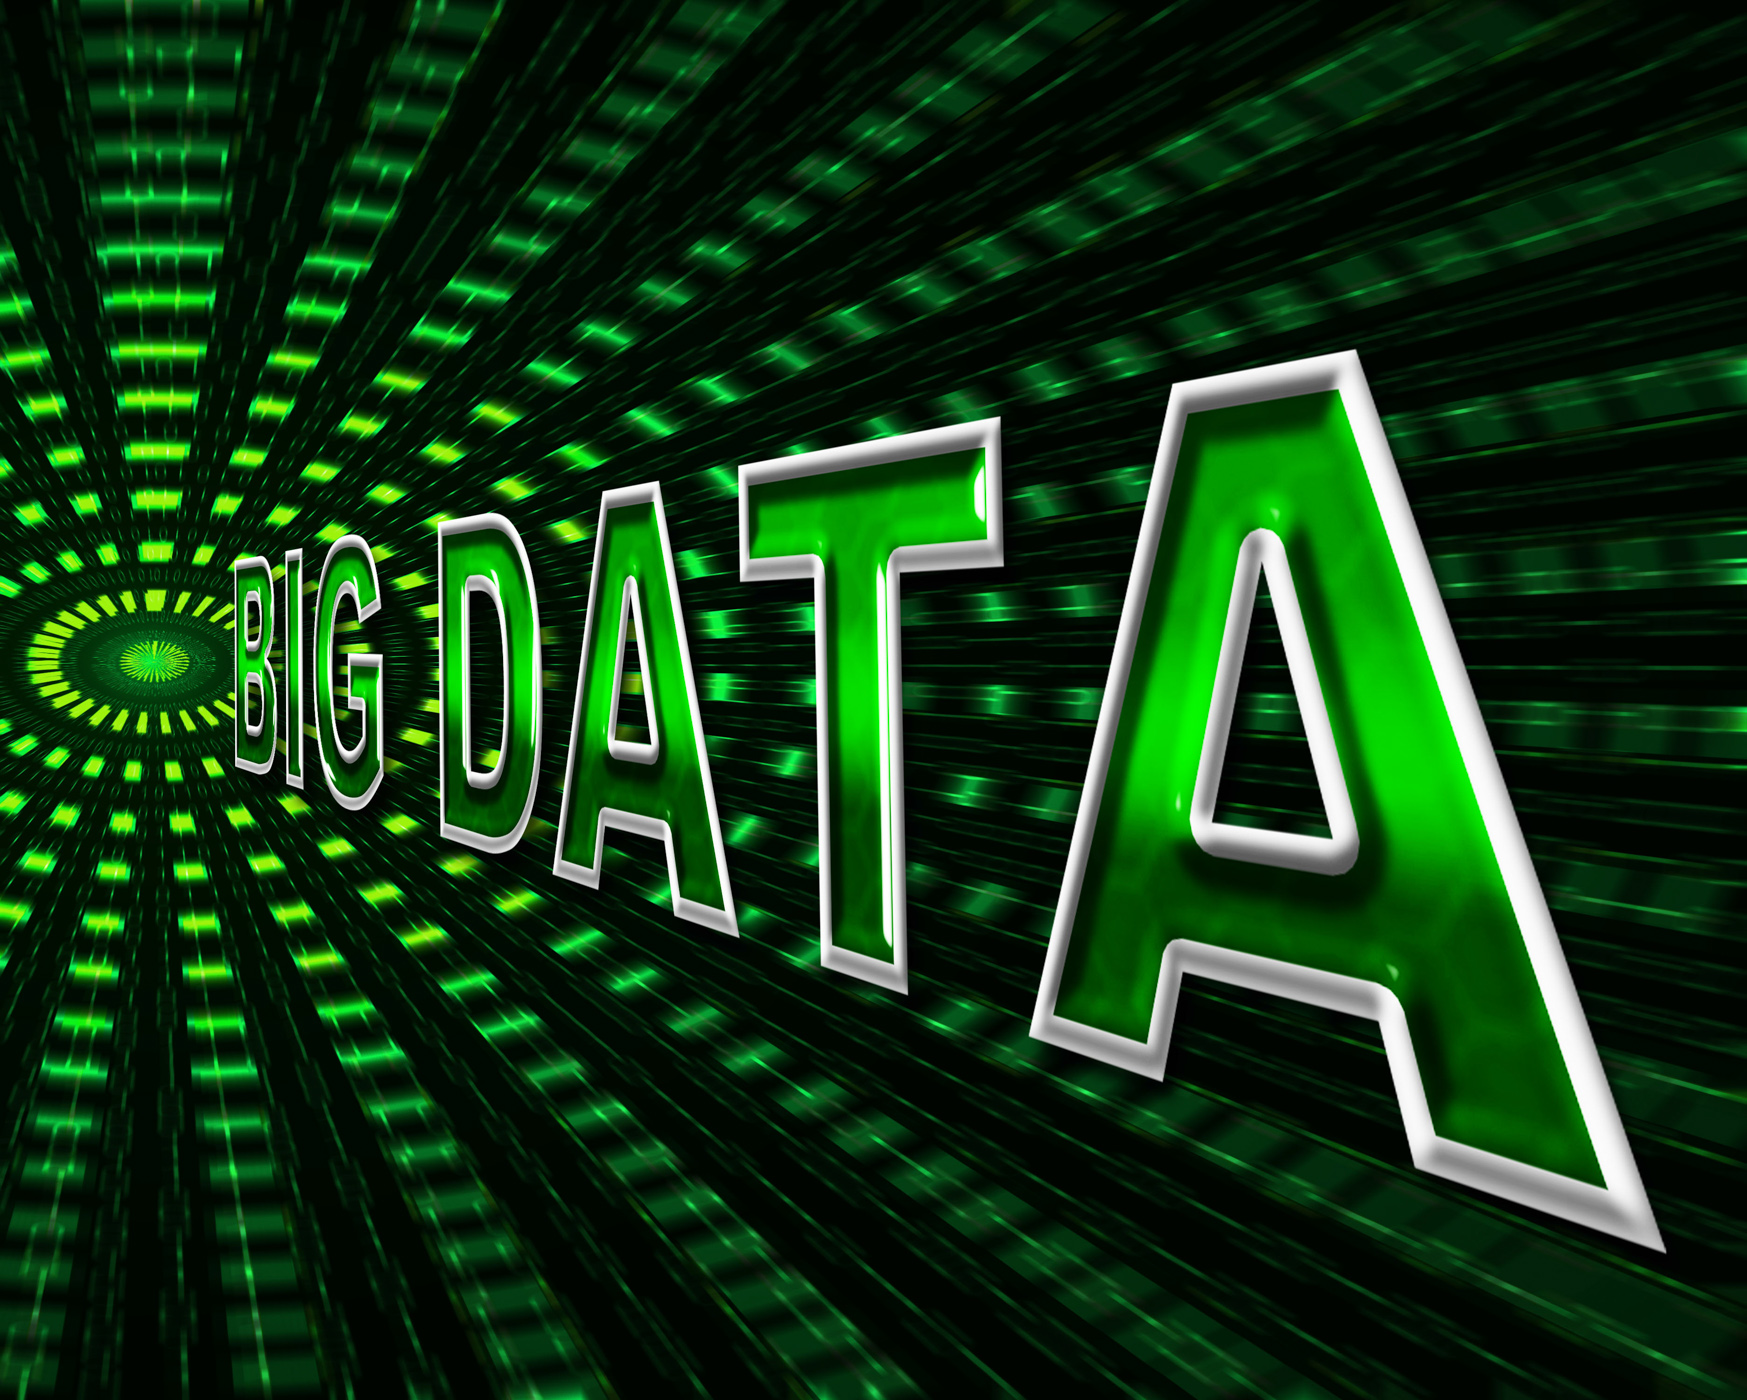 Big data shows info bytes and byte photo